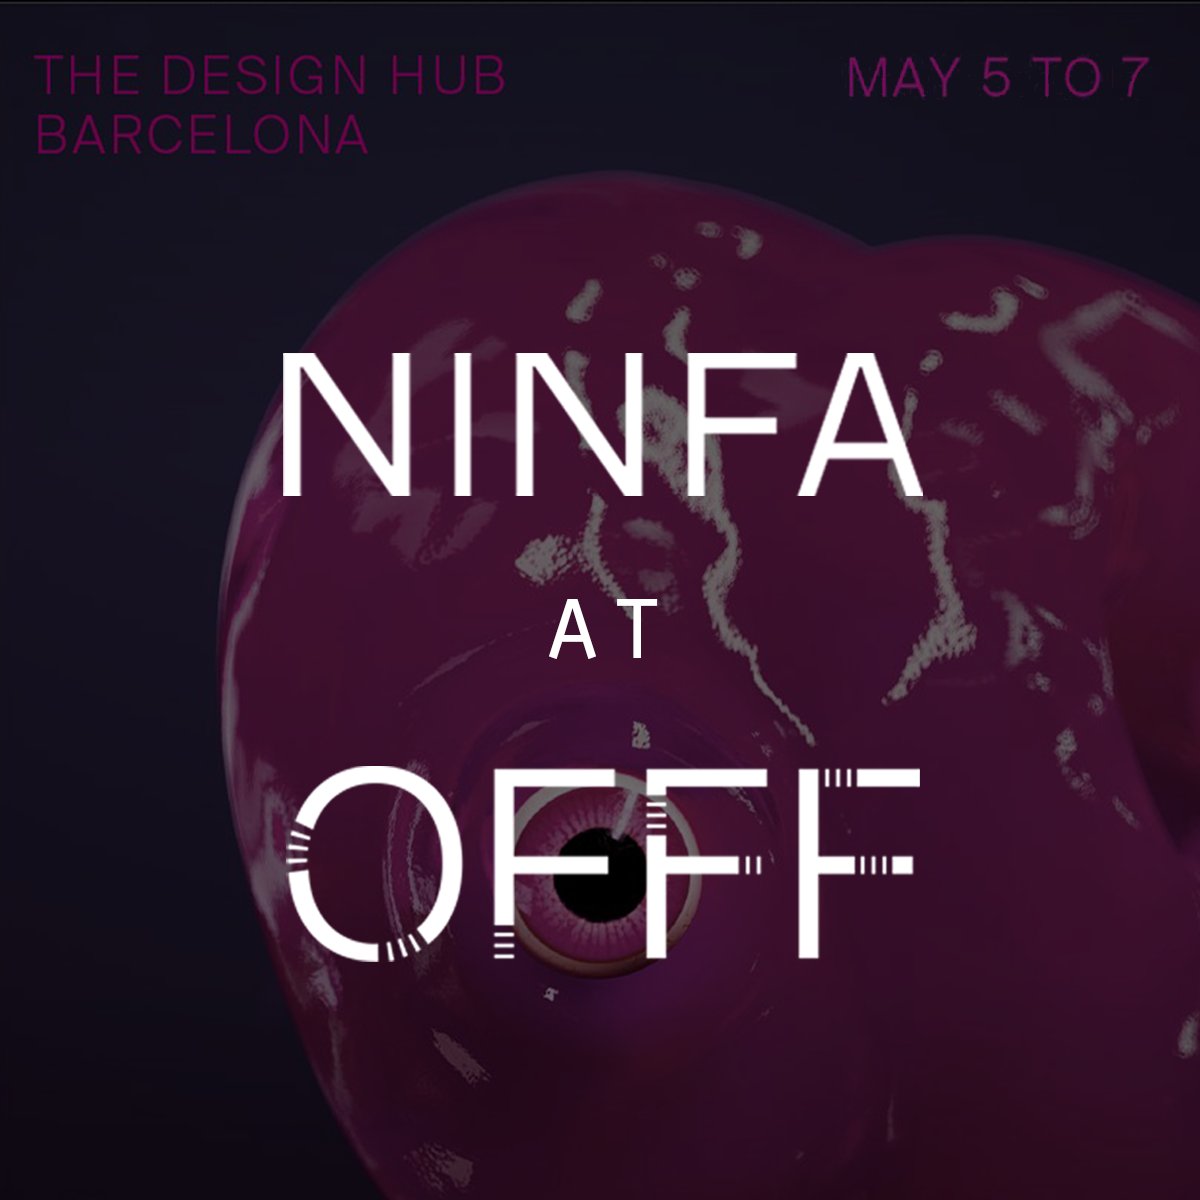 SAVE THE DATE guys! 

Come and meet Ninfa team at @OFFFBarcelona.

The new edition of OFFF will take place on May 5, 6 and 7. 

The festival is well known to showcase the latest trends in the field of creativity and design.

#nftcommunity #NFTs #DigitalArt #web3 #nftcollectors